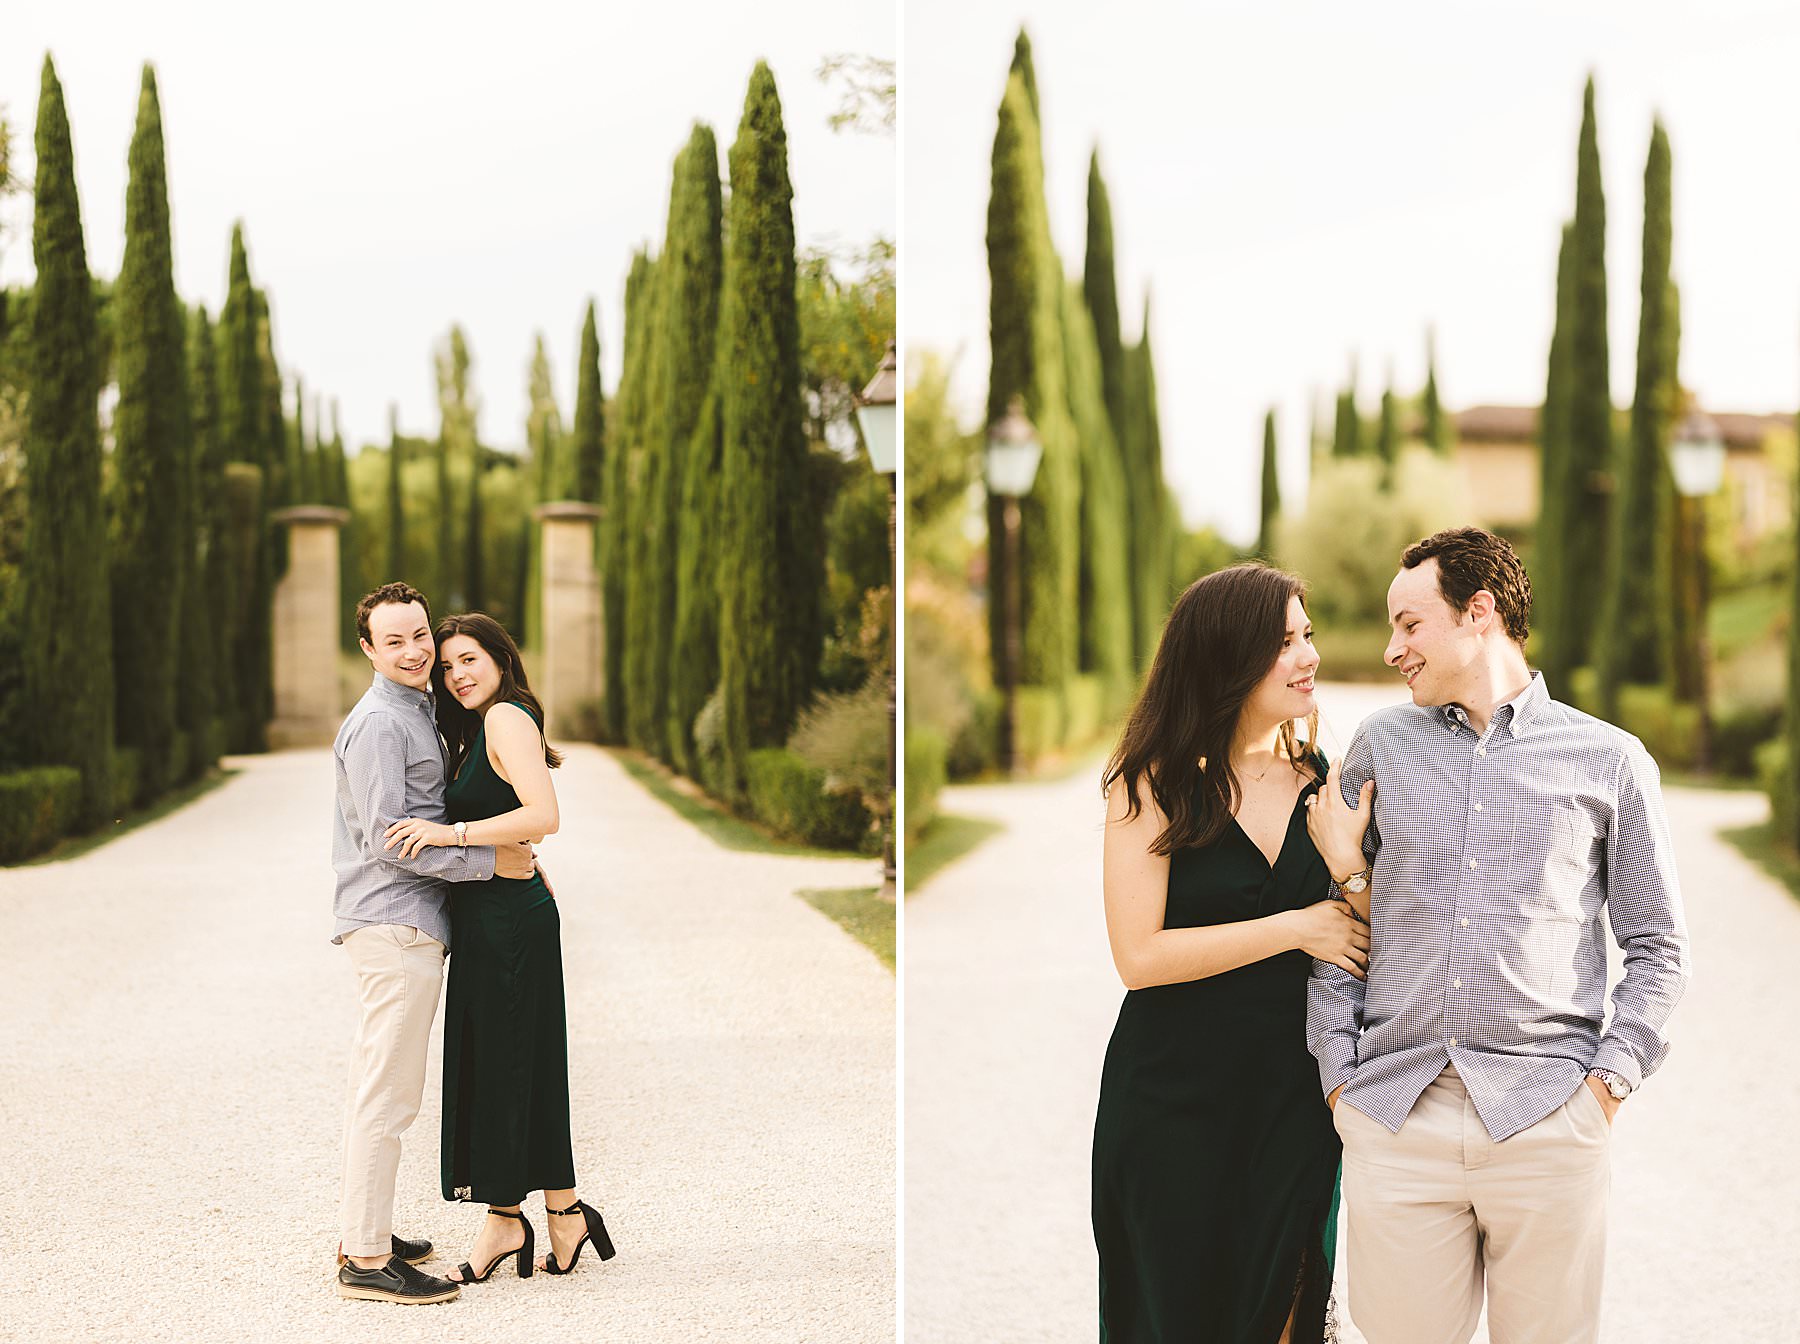 Celebrate the love of your engagement session in an evocative typical Tuscan resort like as the Borgo Santo Pietro